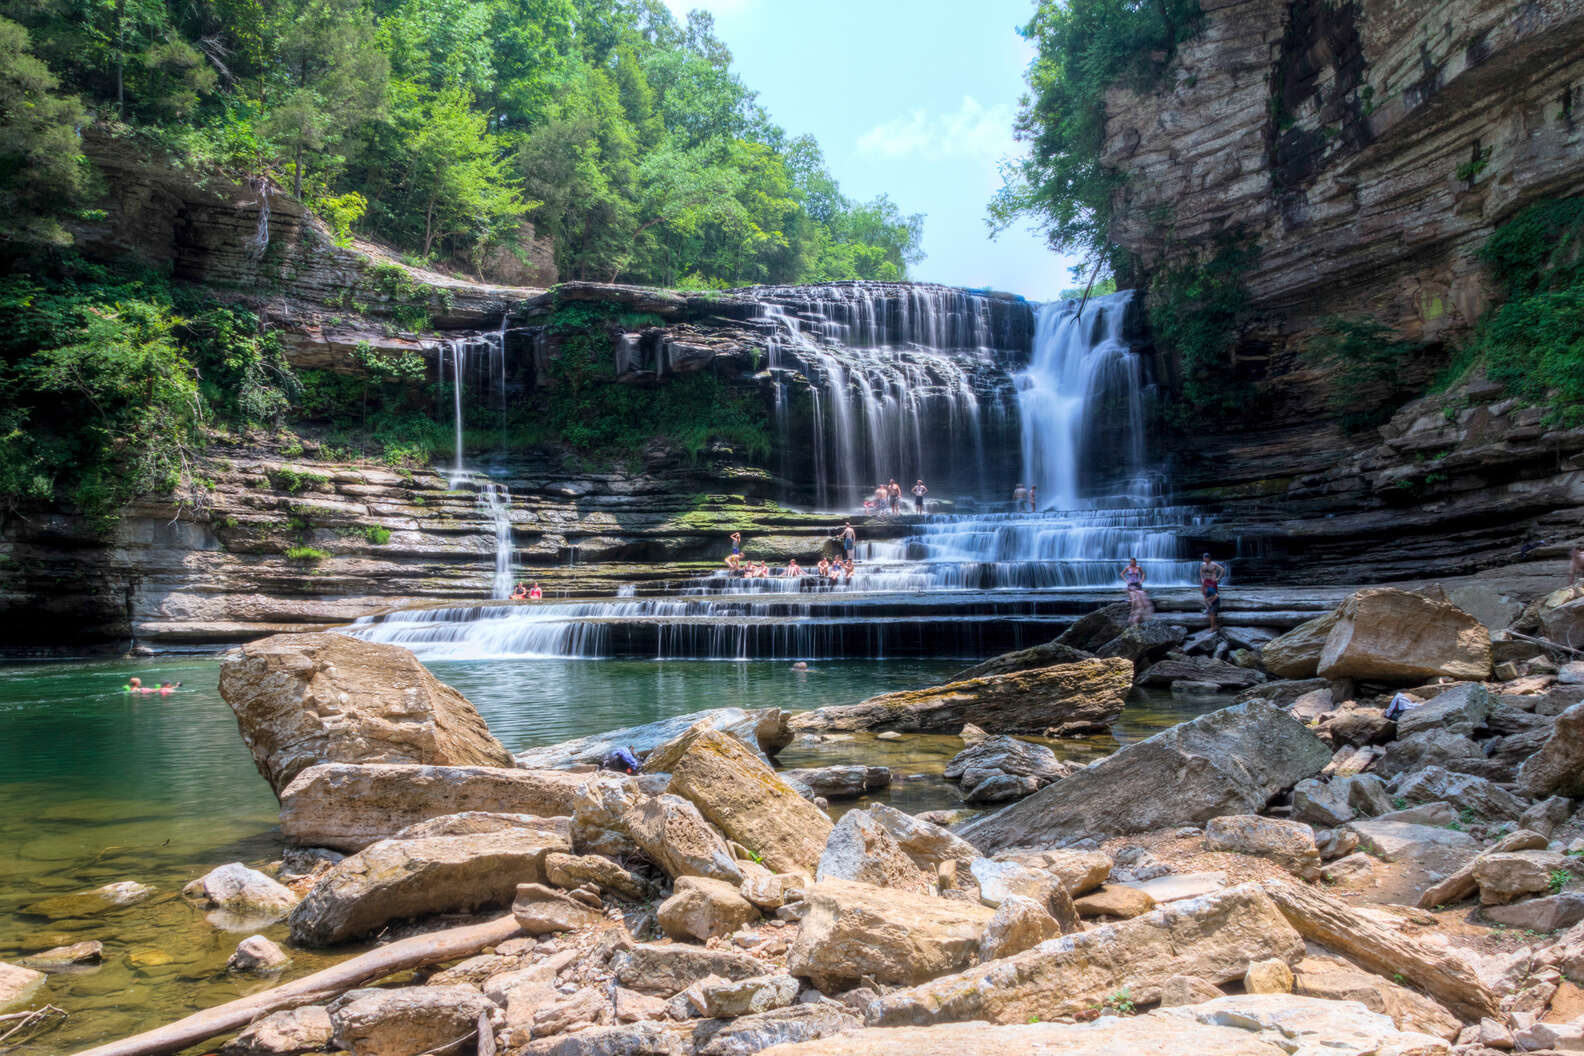 10 Best Trails and Hikes in Nashville